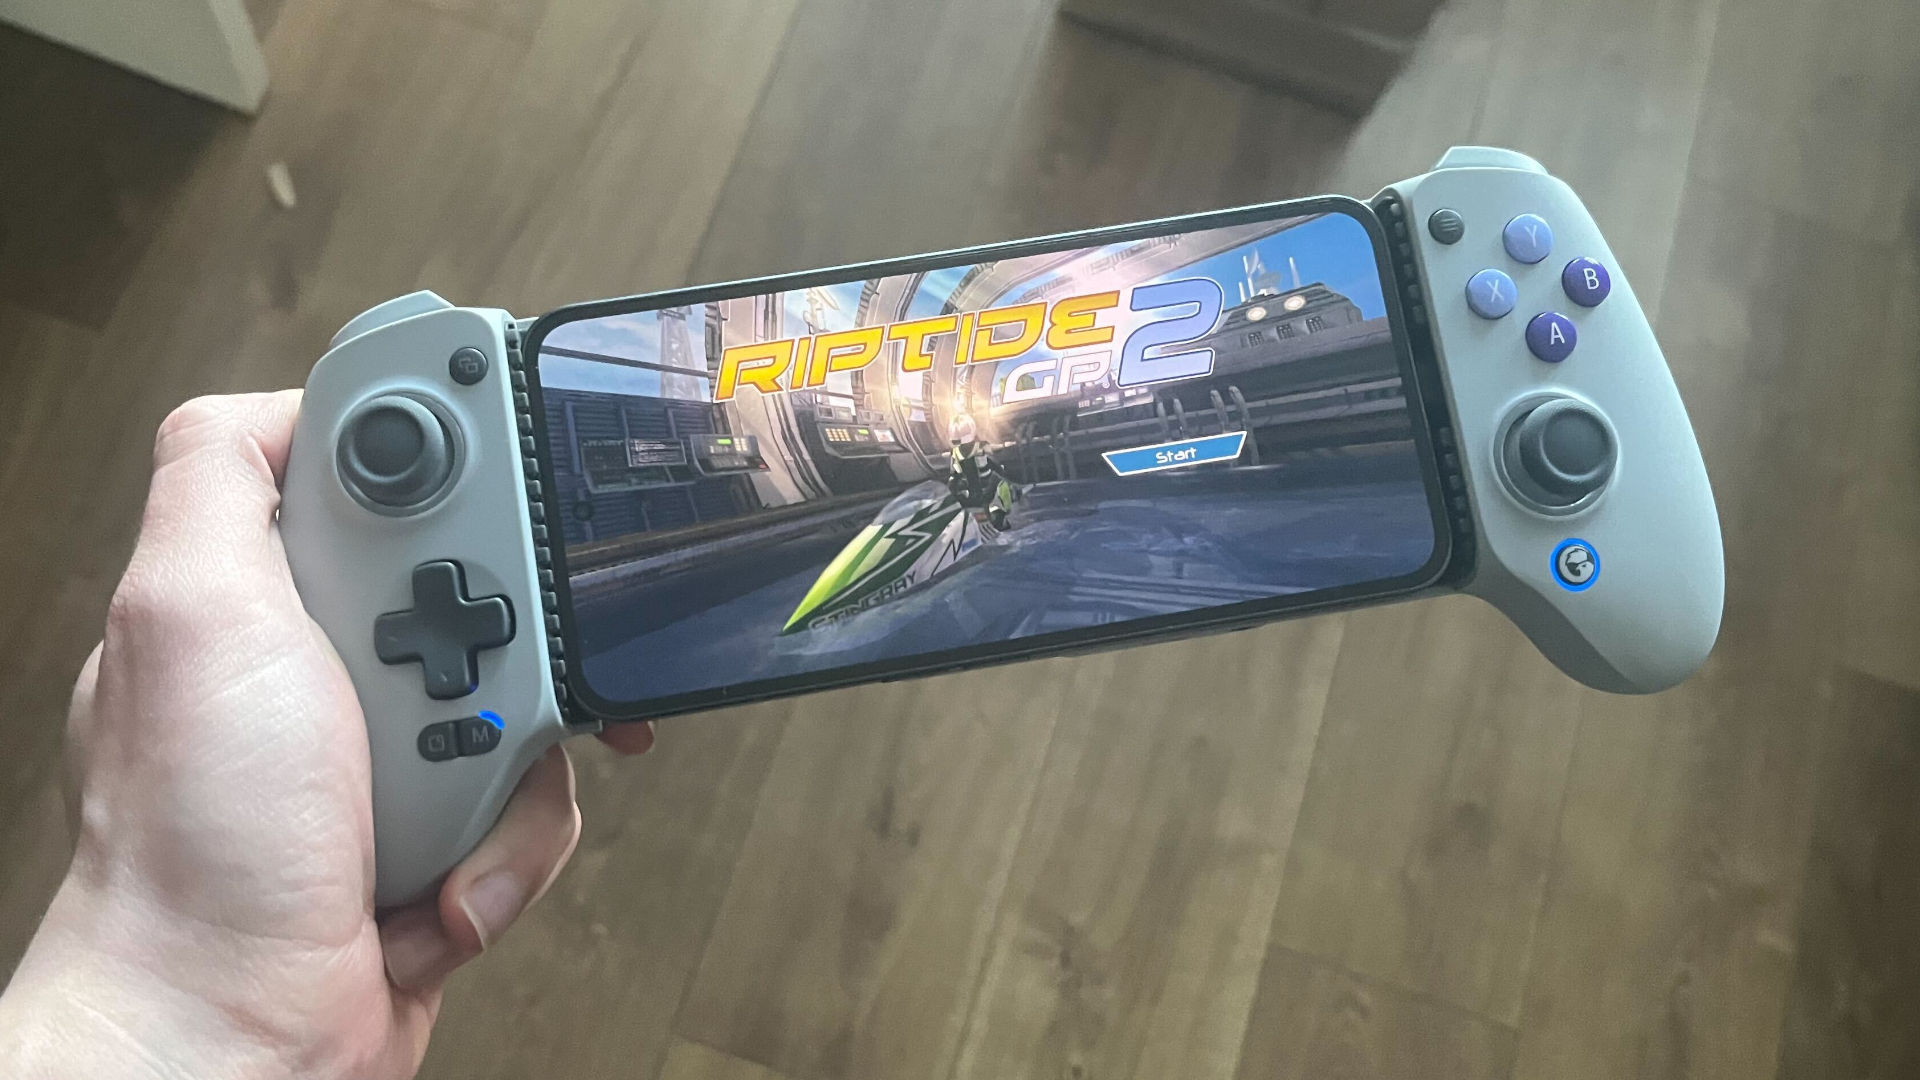 NEW GameSir G8 Galileo Mobile Game Controller: The Best One Yet